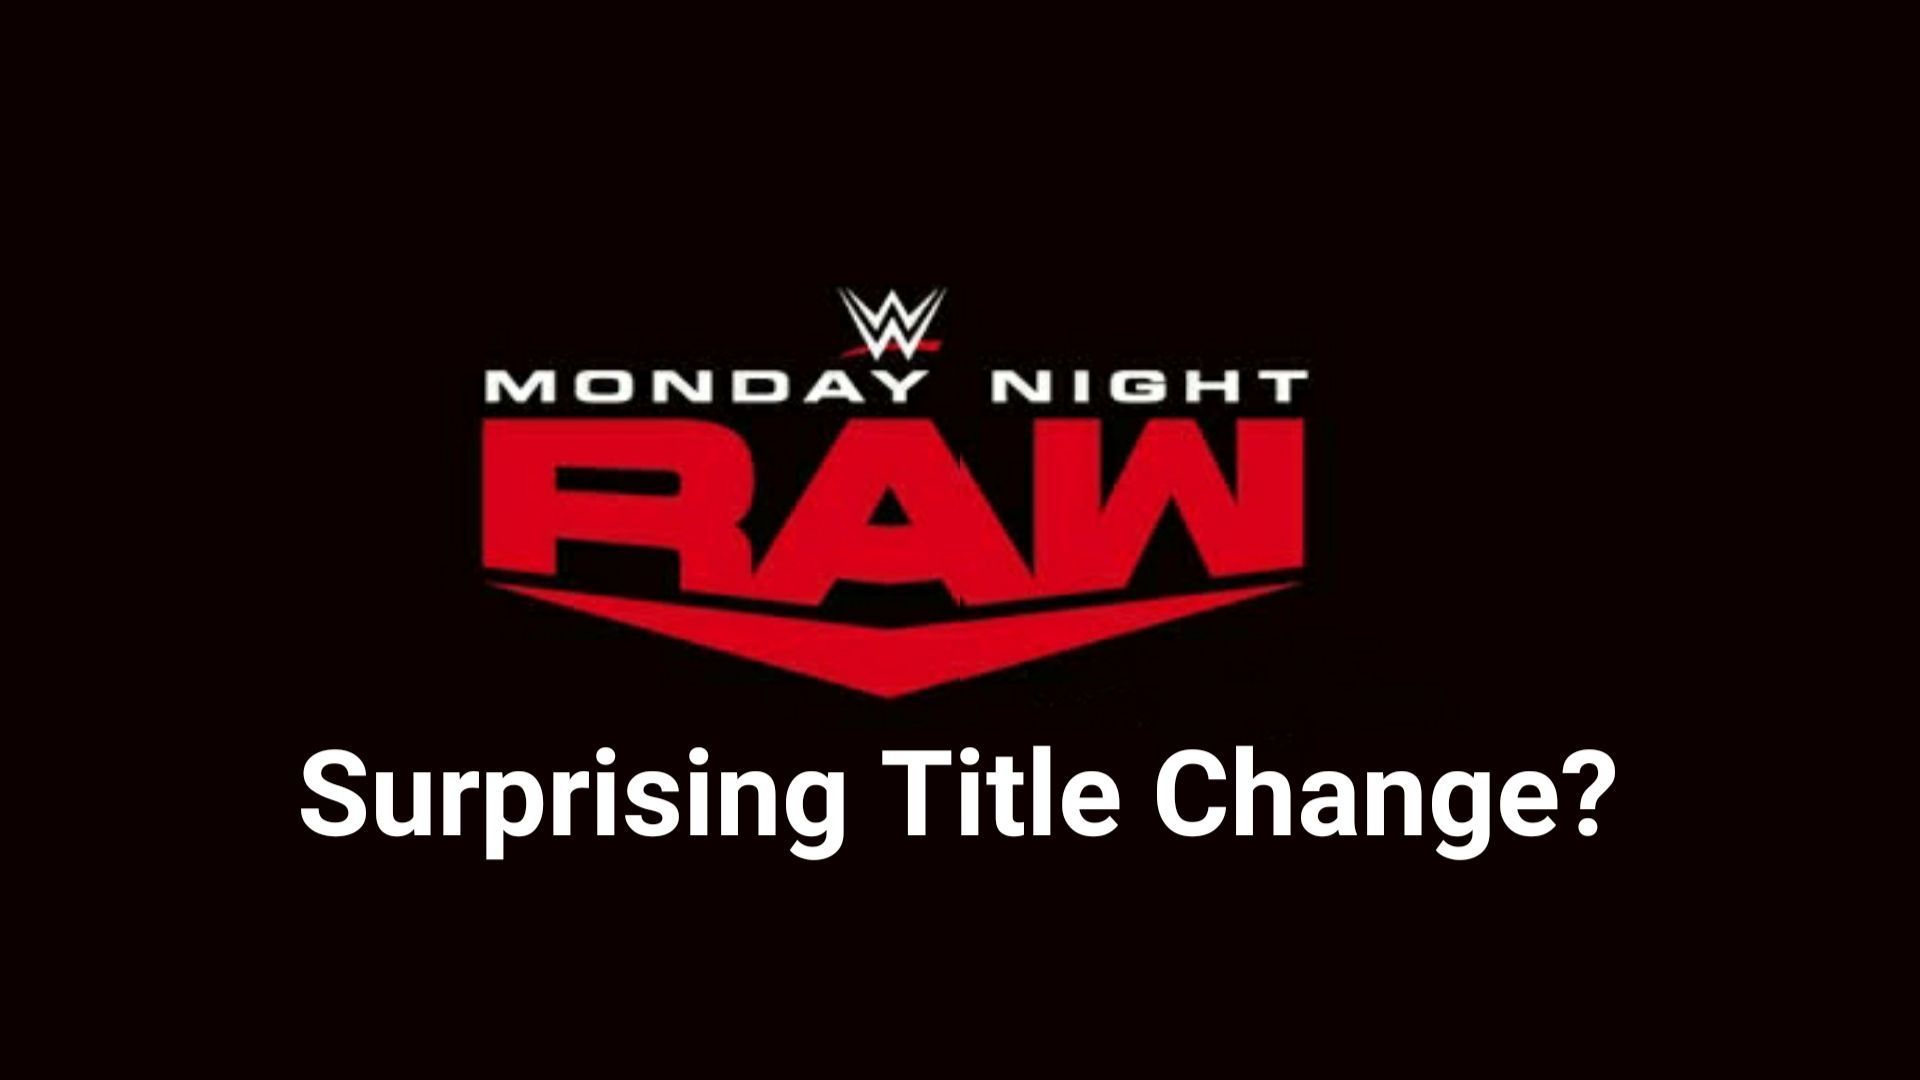 Will we see WWE crown new champions on RAW?